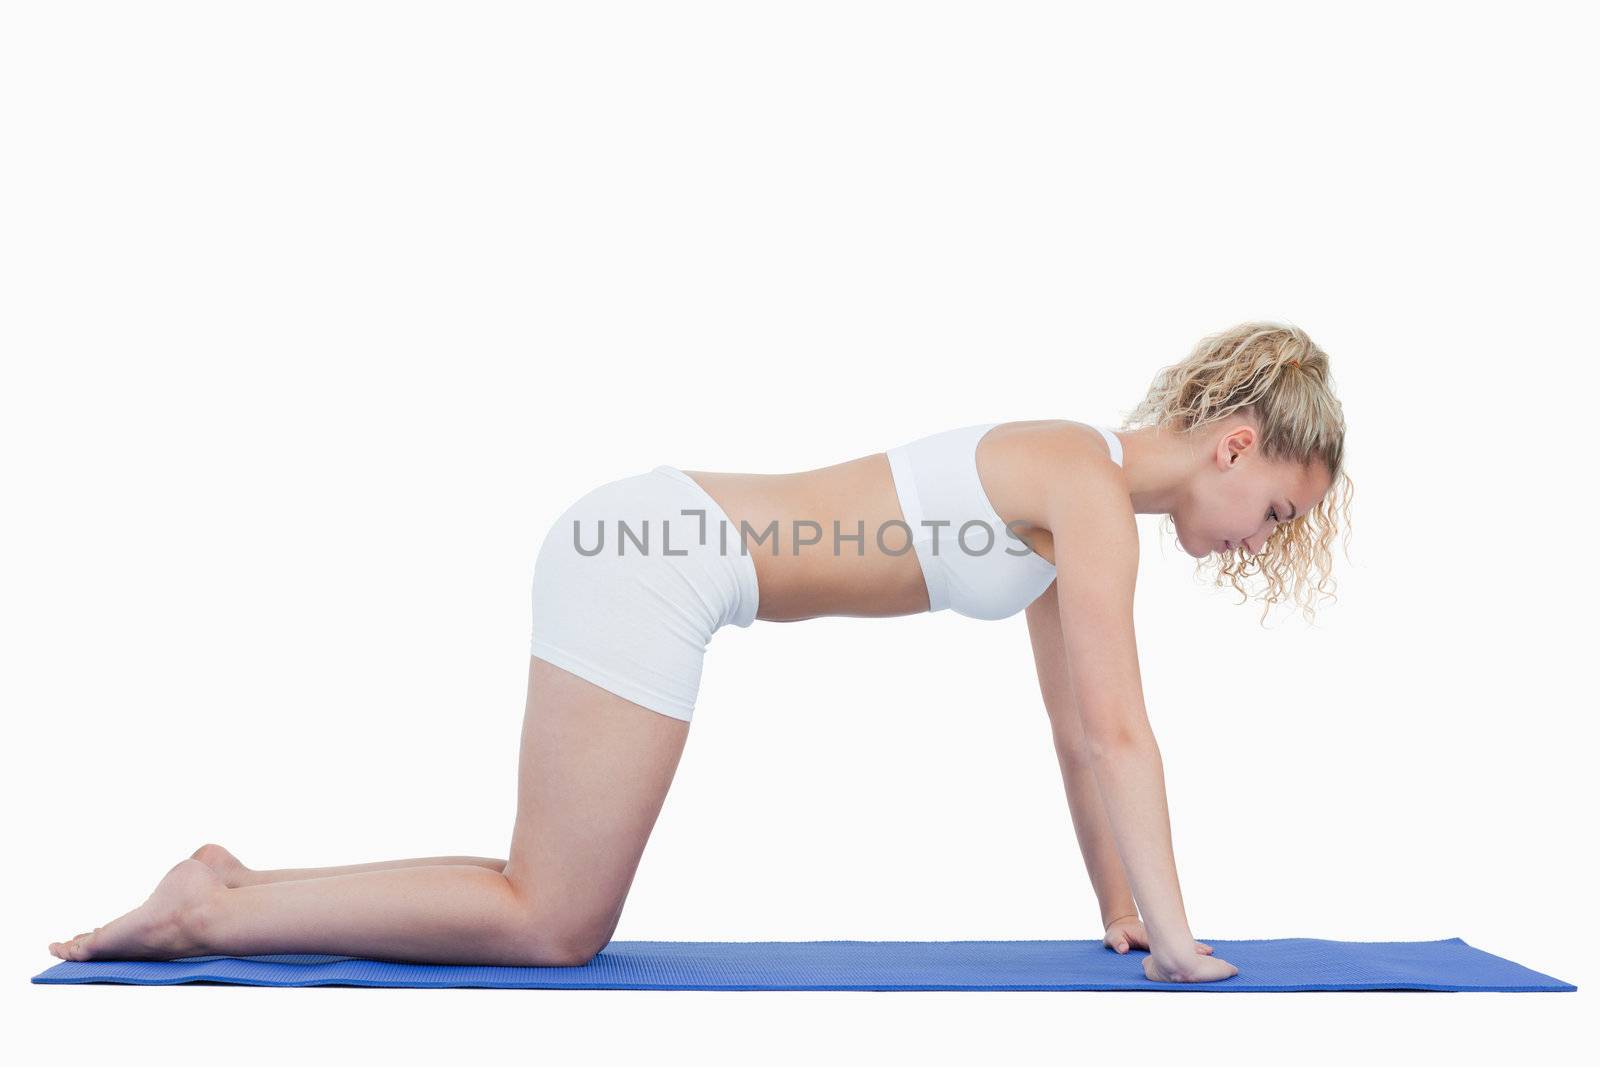 Blonde teenager doing gymnastics on all fours against a white backgrounds